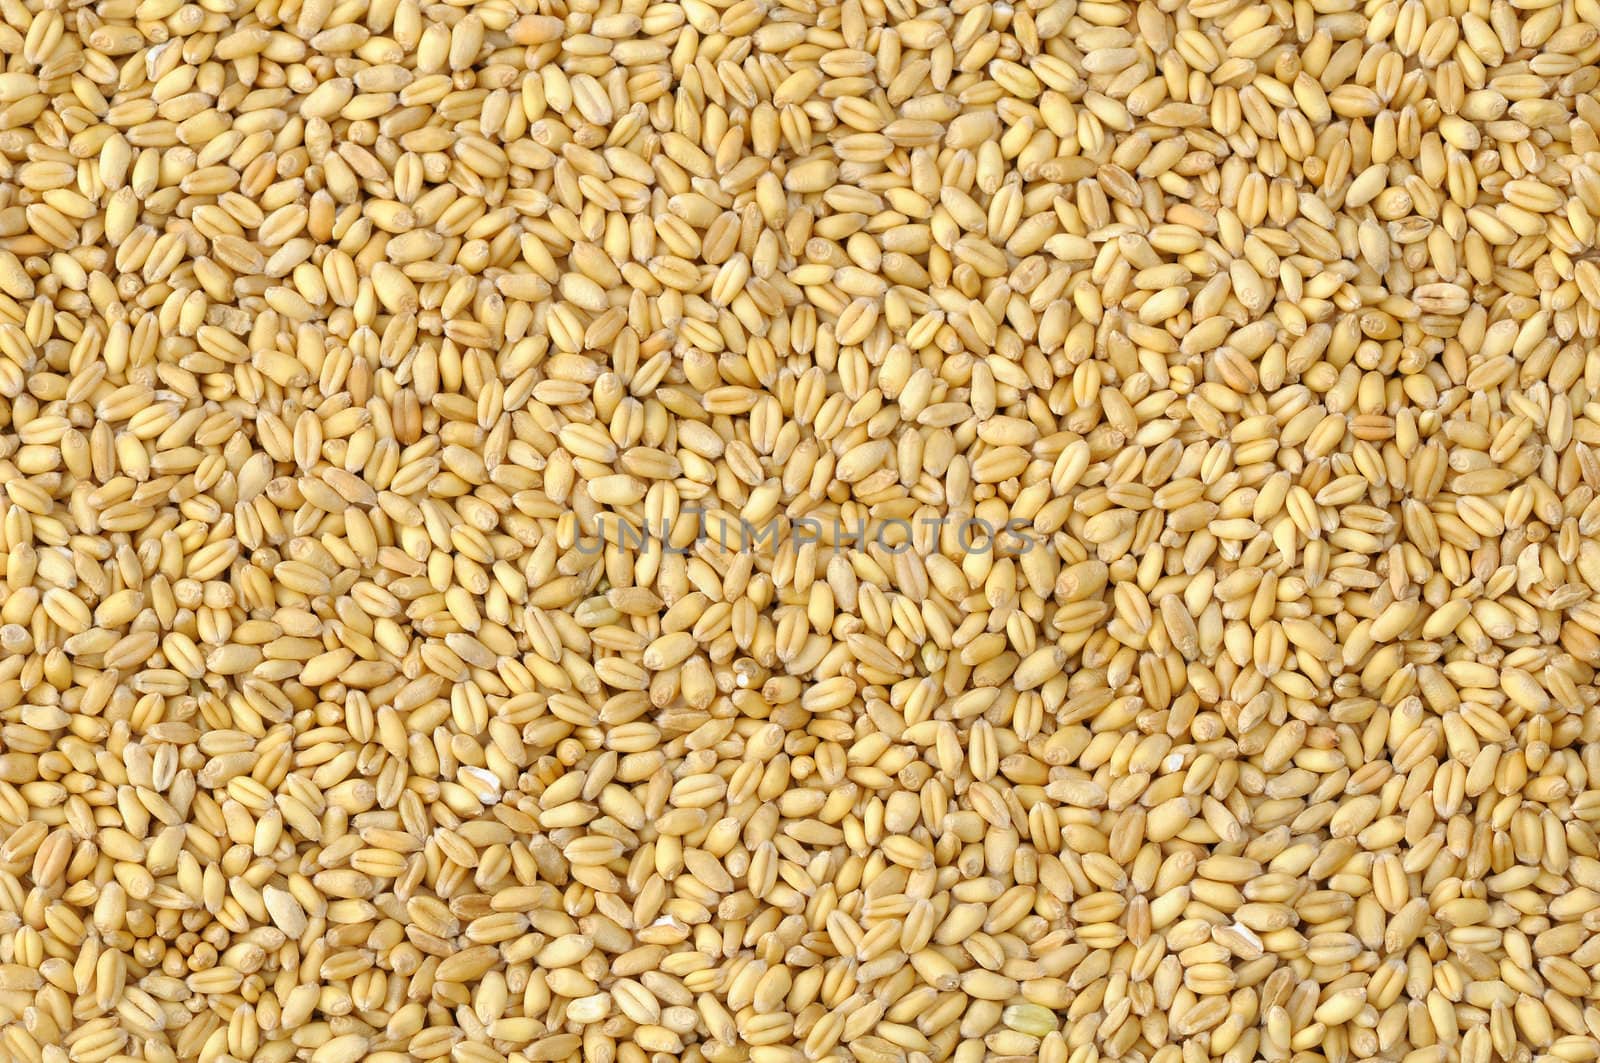 Textured soft wheat seeds background in natural light